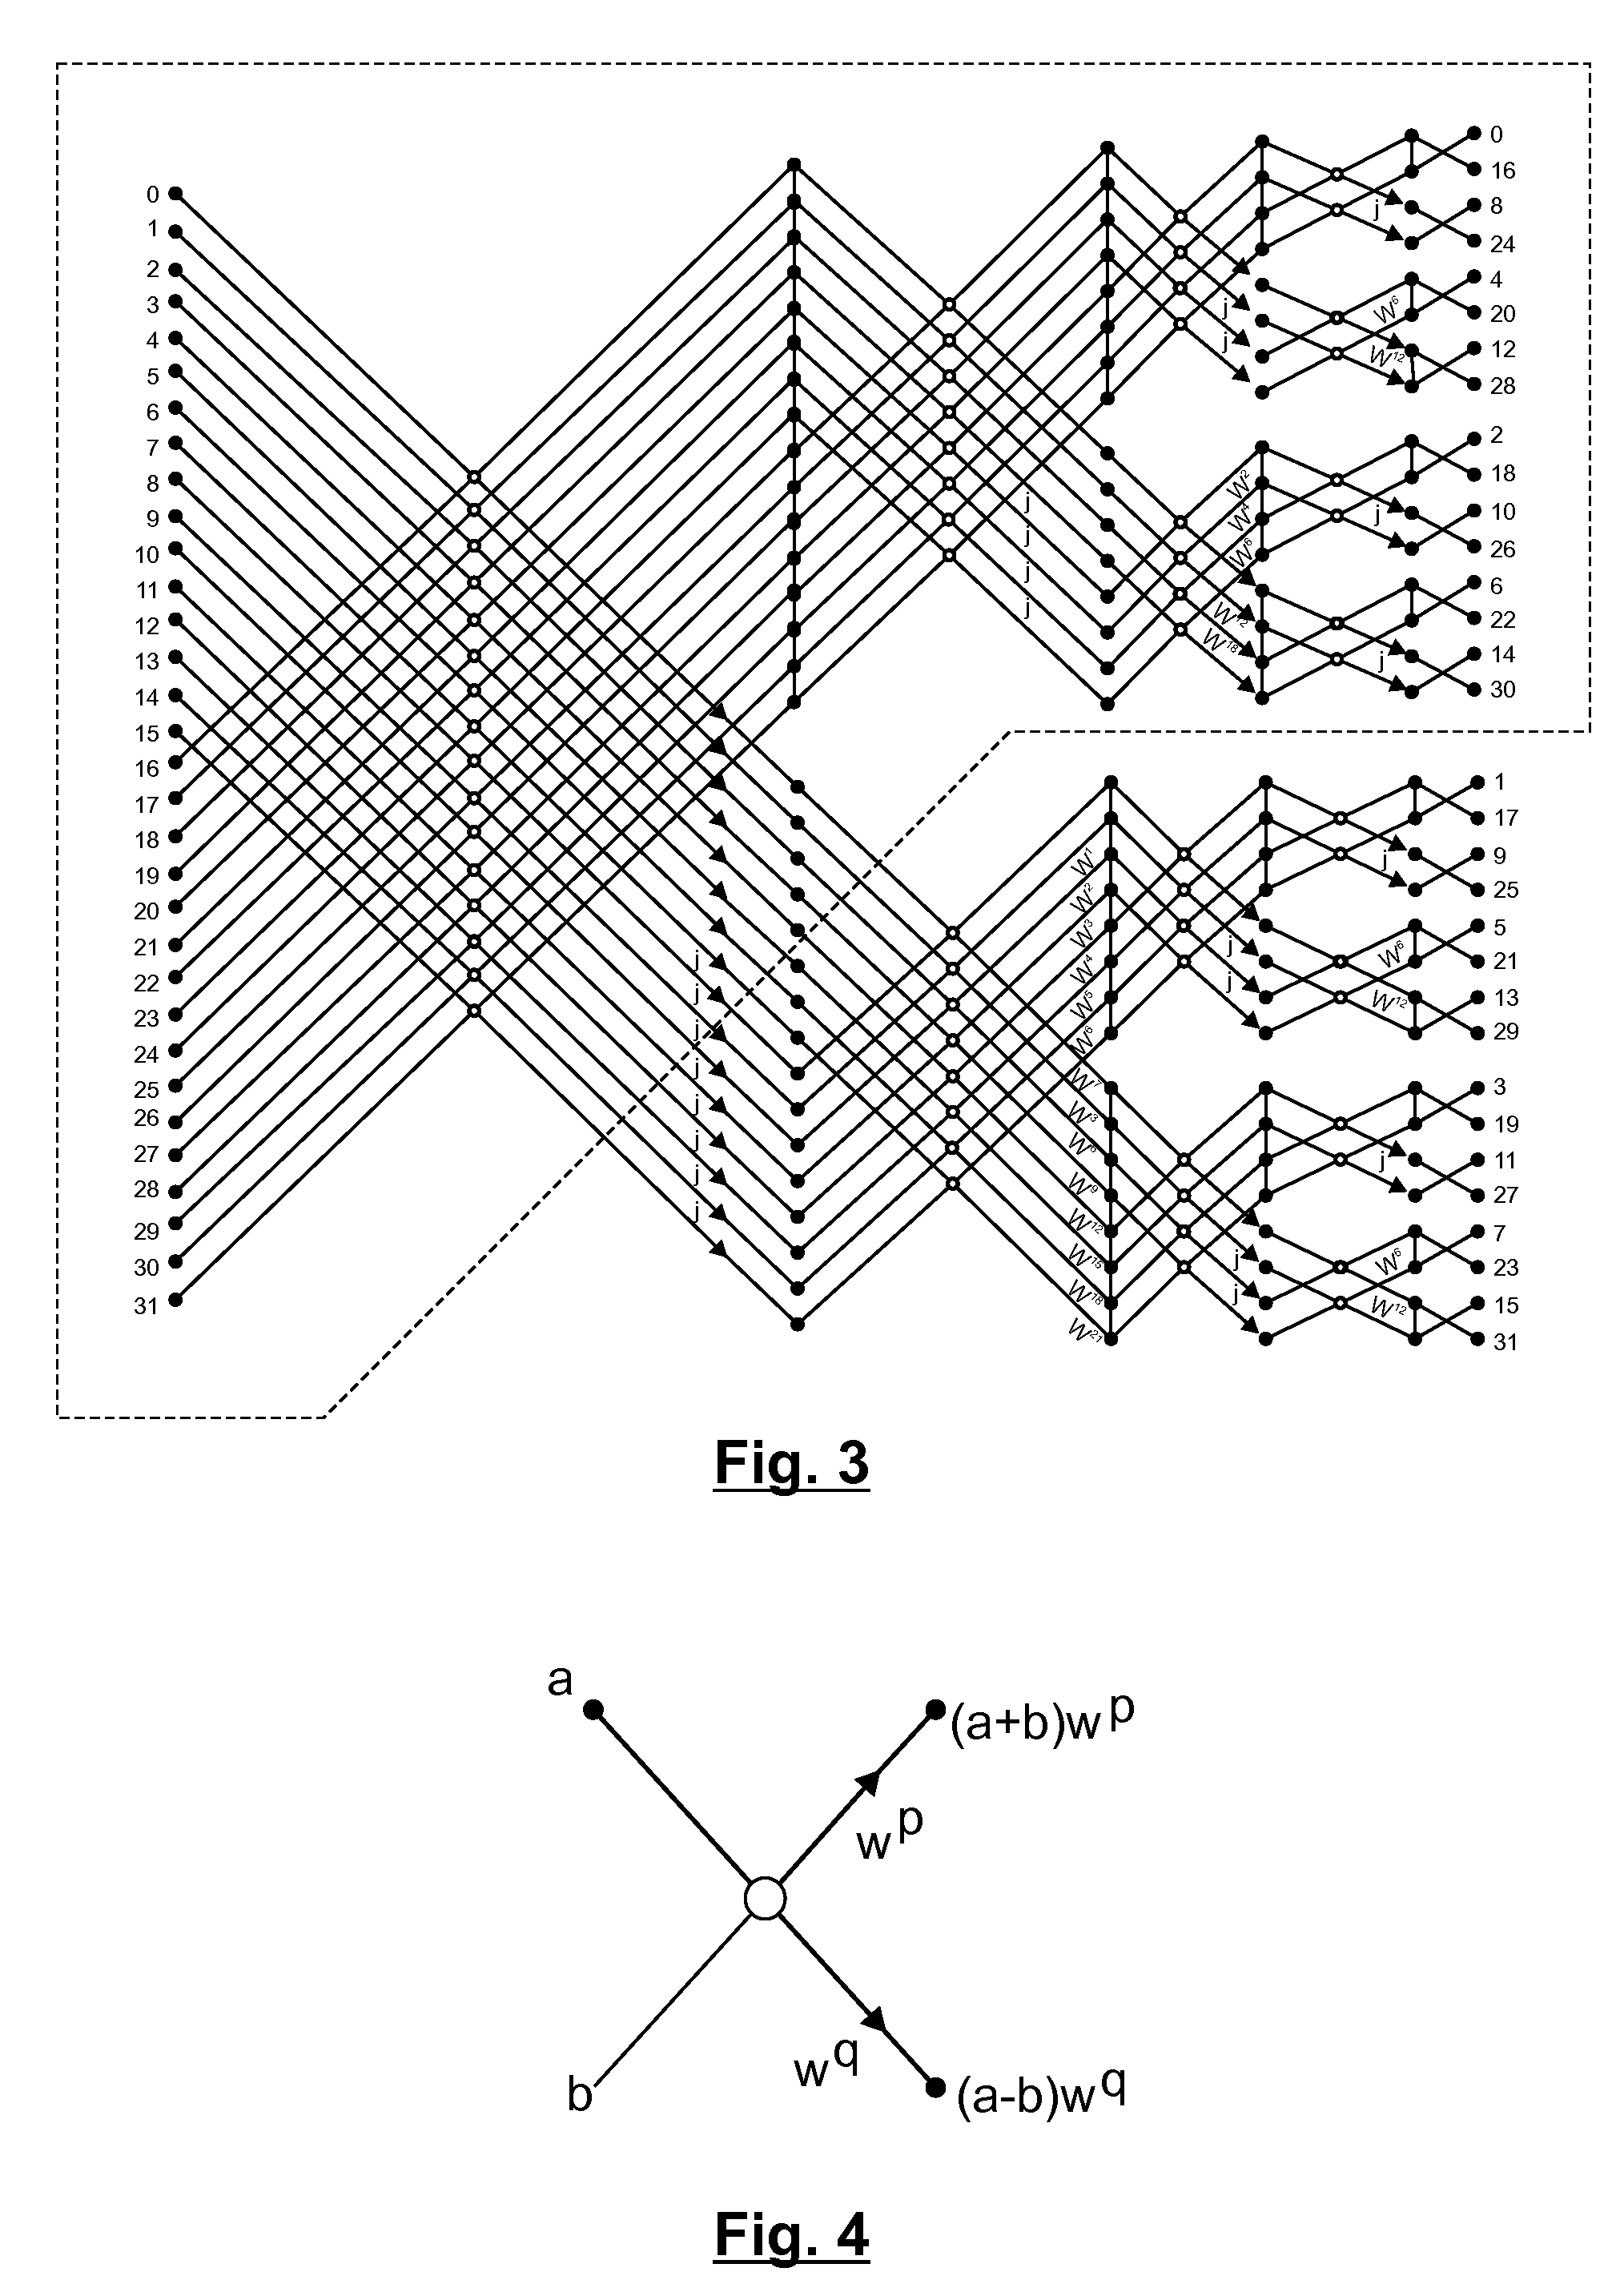 Method for modulating an OQAM type multi-carrier signal, and corresponding computer program and modulator